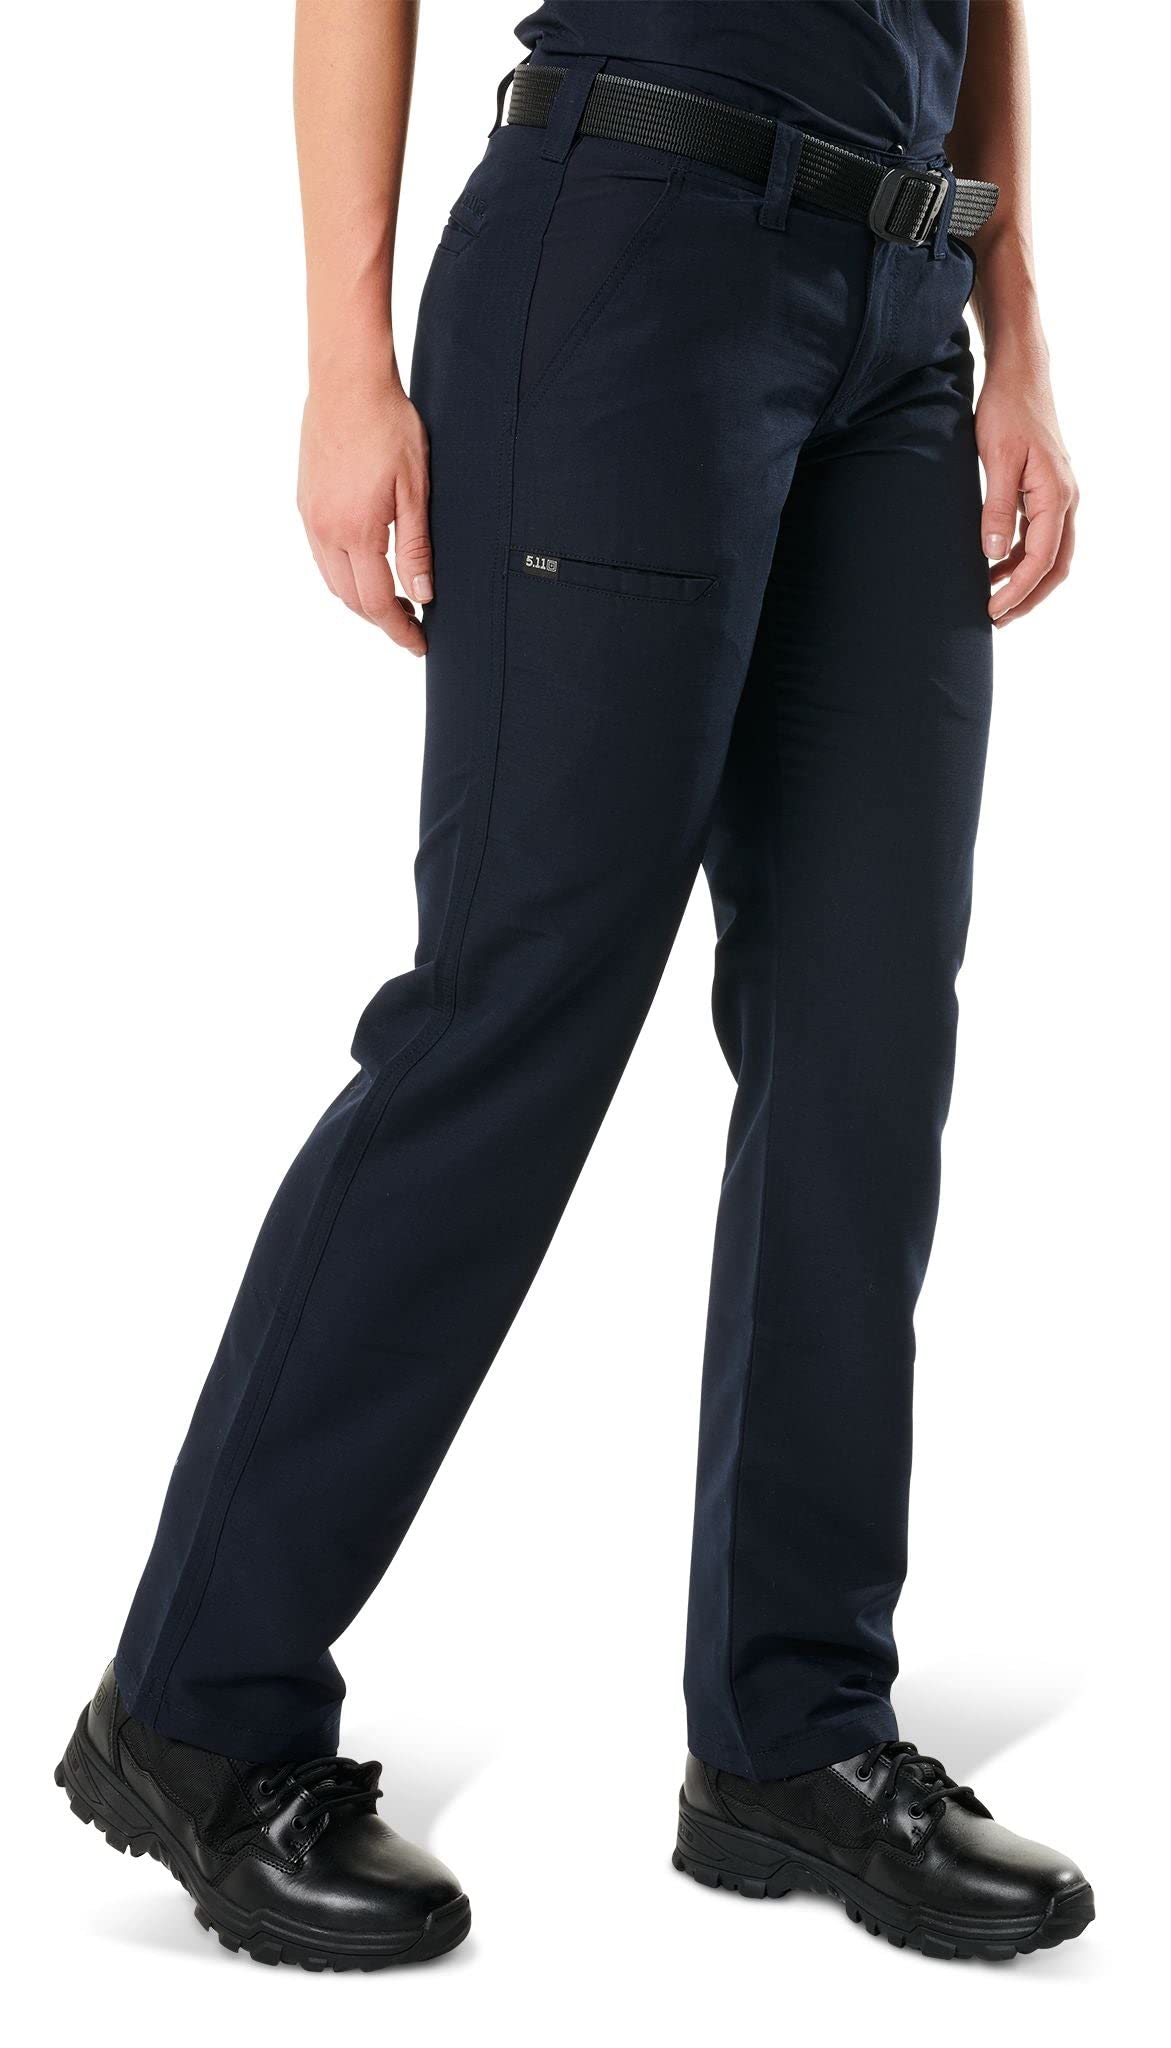 5.11 Tactical Women's Fast-Tac Urban Pants, Water-Resistant Finish, 4-Way Stretch, Style 64420